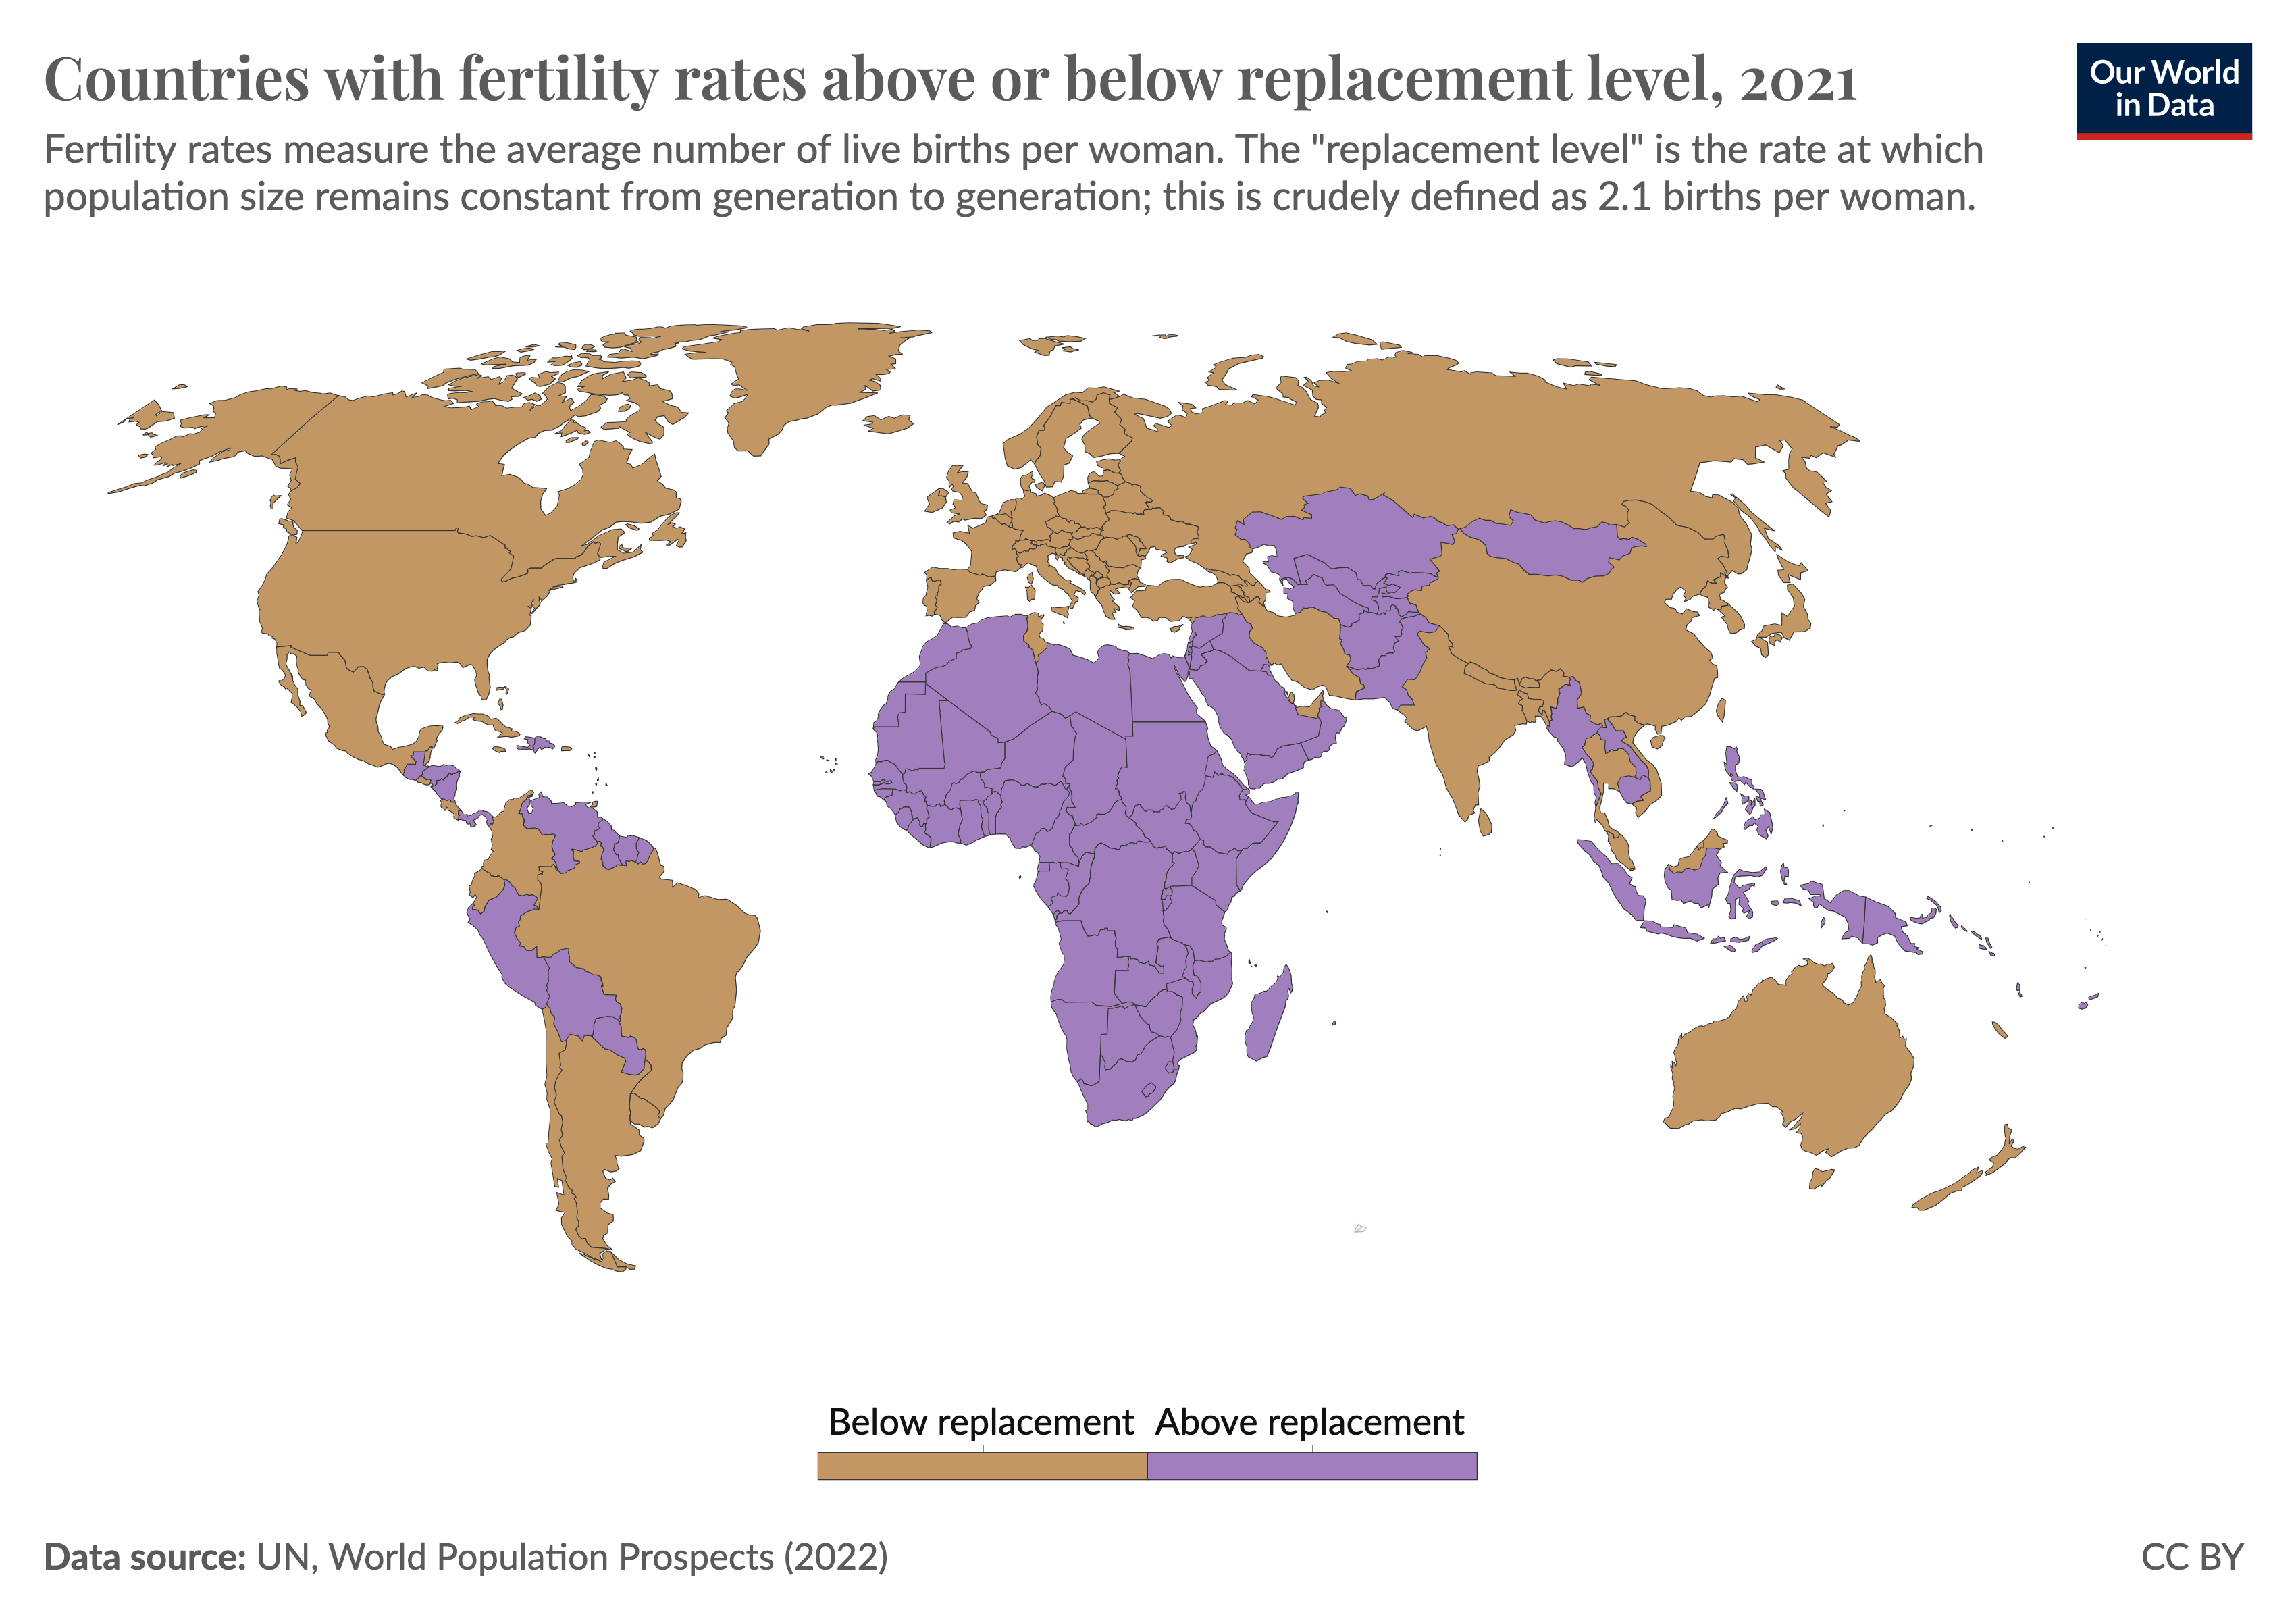 Global map showing which countries have fertility rates above and below the replacement rate of 2.1 births per woman.